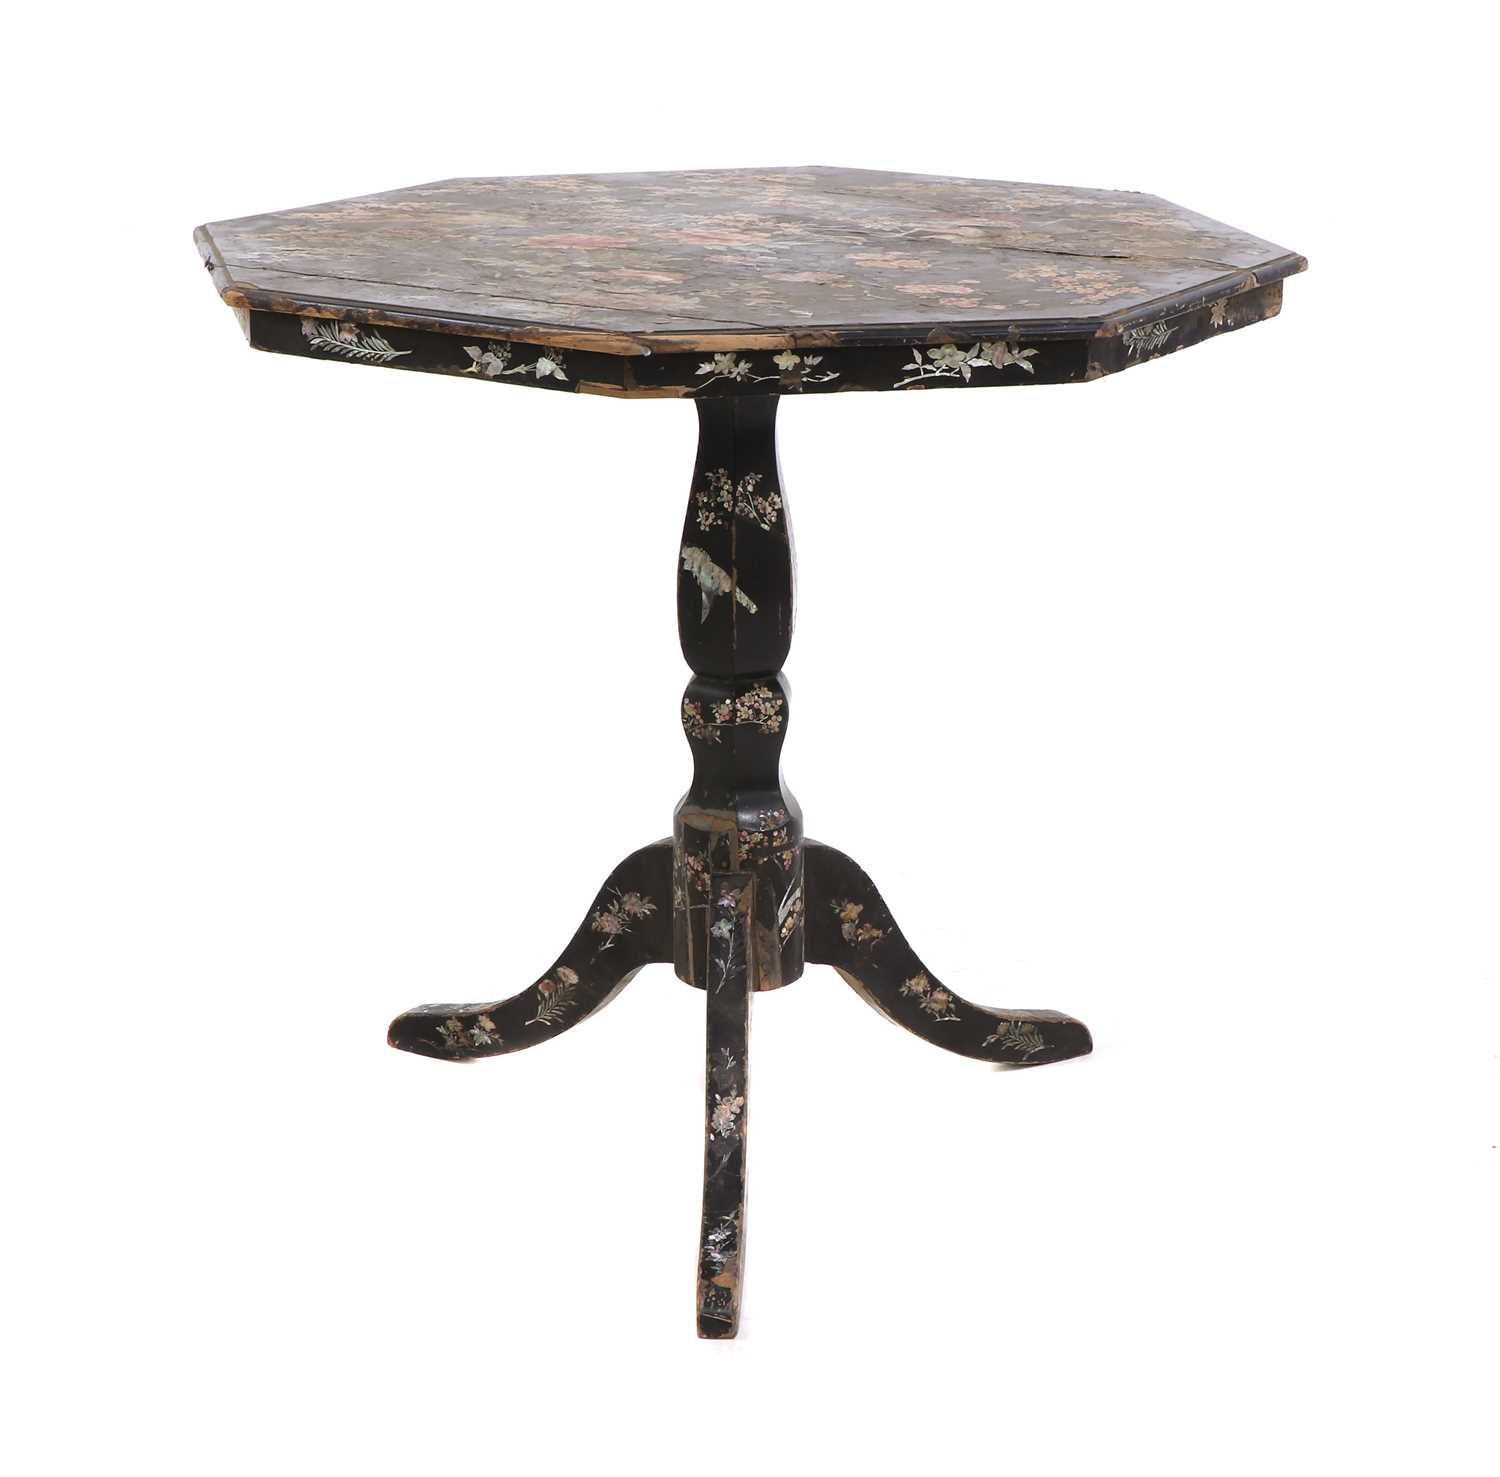 Lot 162 - A Victorian lacquered, mother-of-pearl inlaid and painted octagonal occasional table